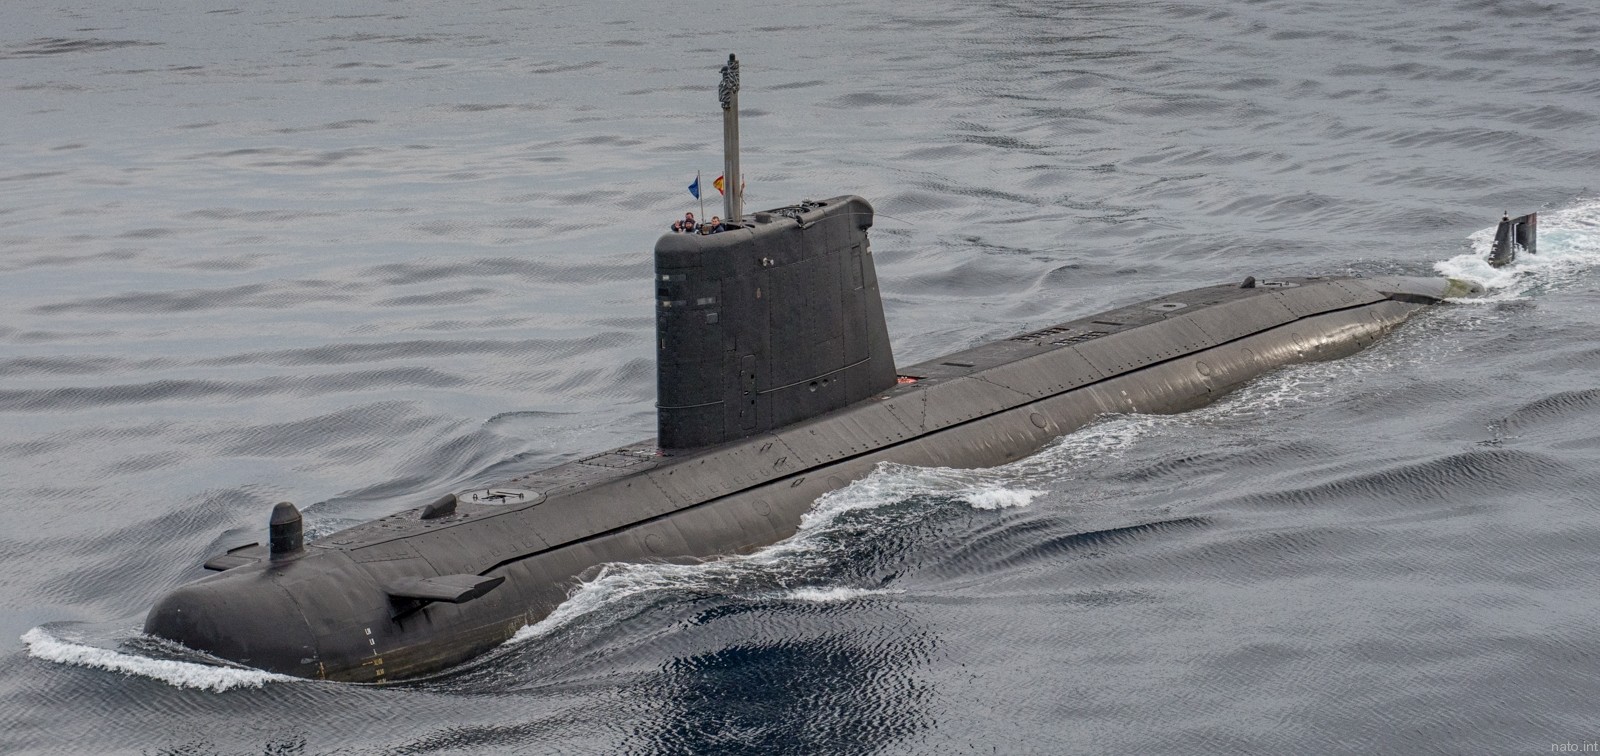 agosta class attack submarine ssk 620 621 beverziers 622 la praya 623 ouessant arsenal cherbourg french navy marine nationale 02x